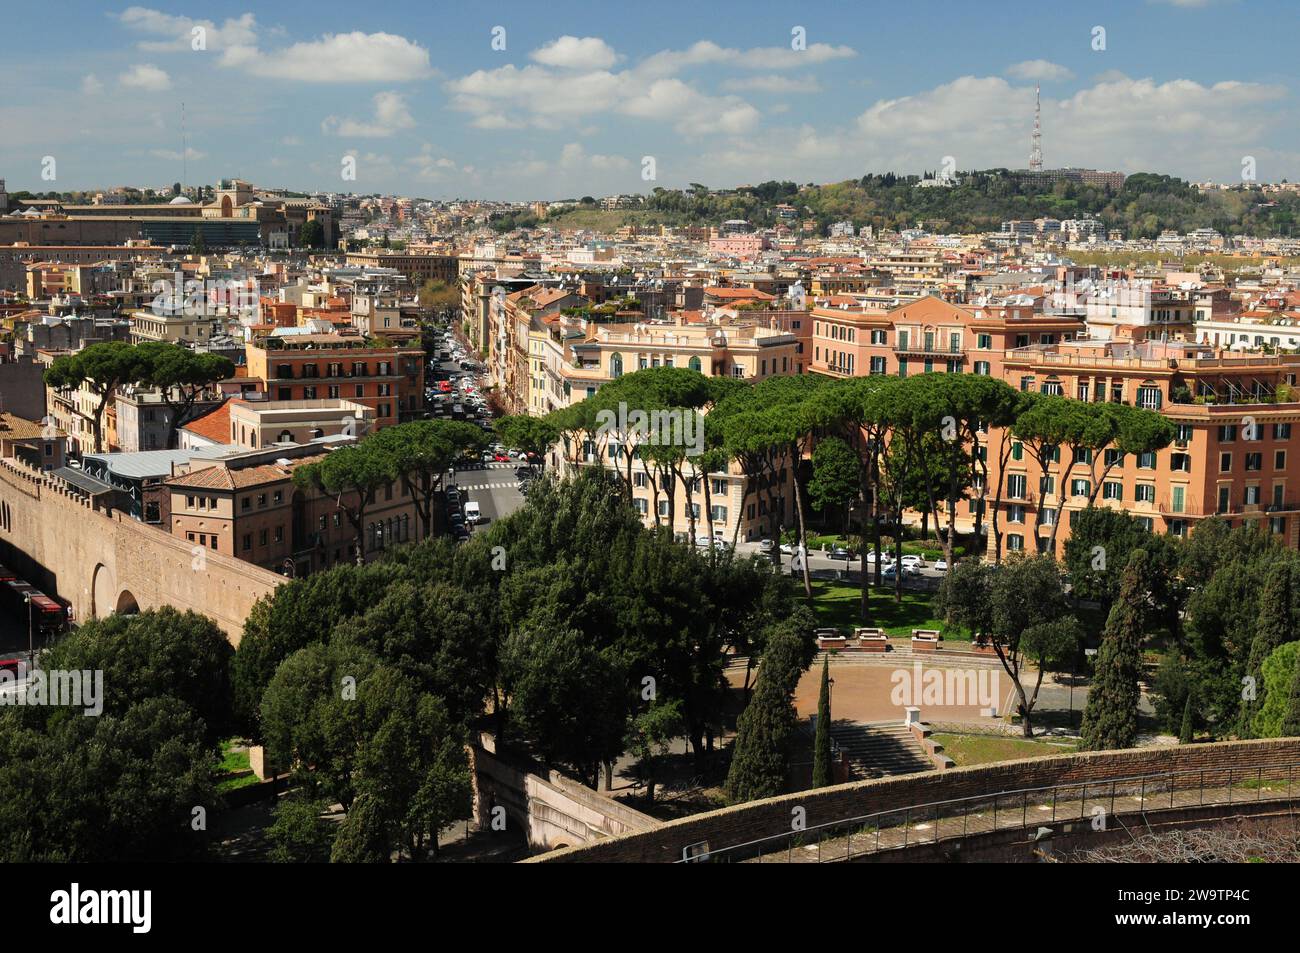 View From Castel Sant'Angelo In Rome Italy On A Wonderful Spring Day With A Few Clouds In The Sky Stock Photo